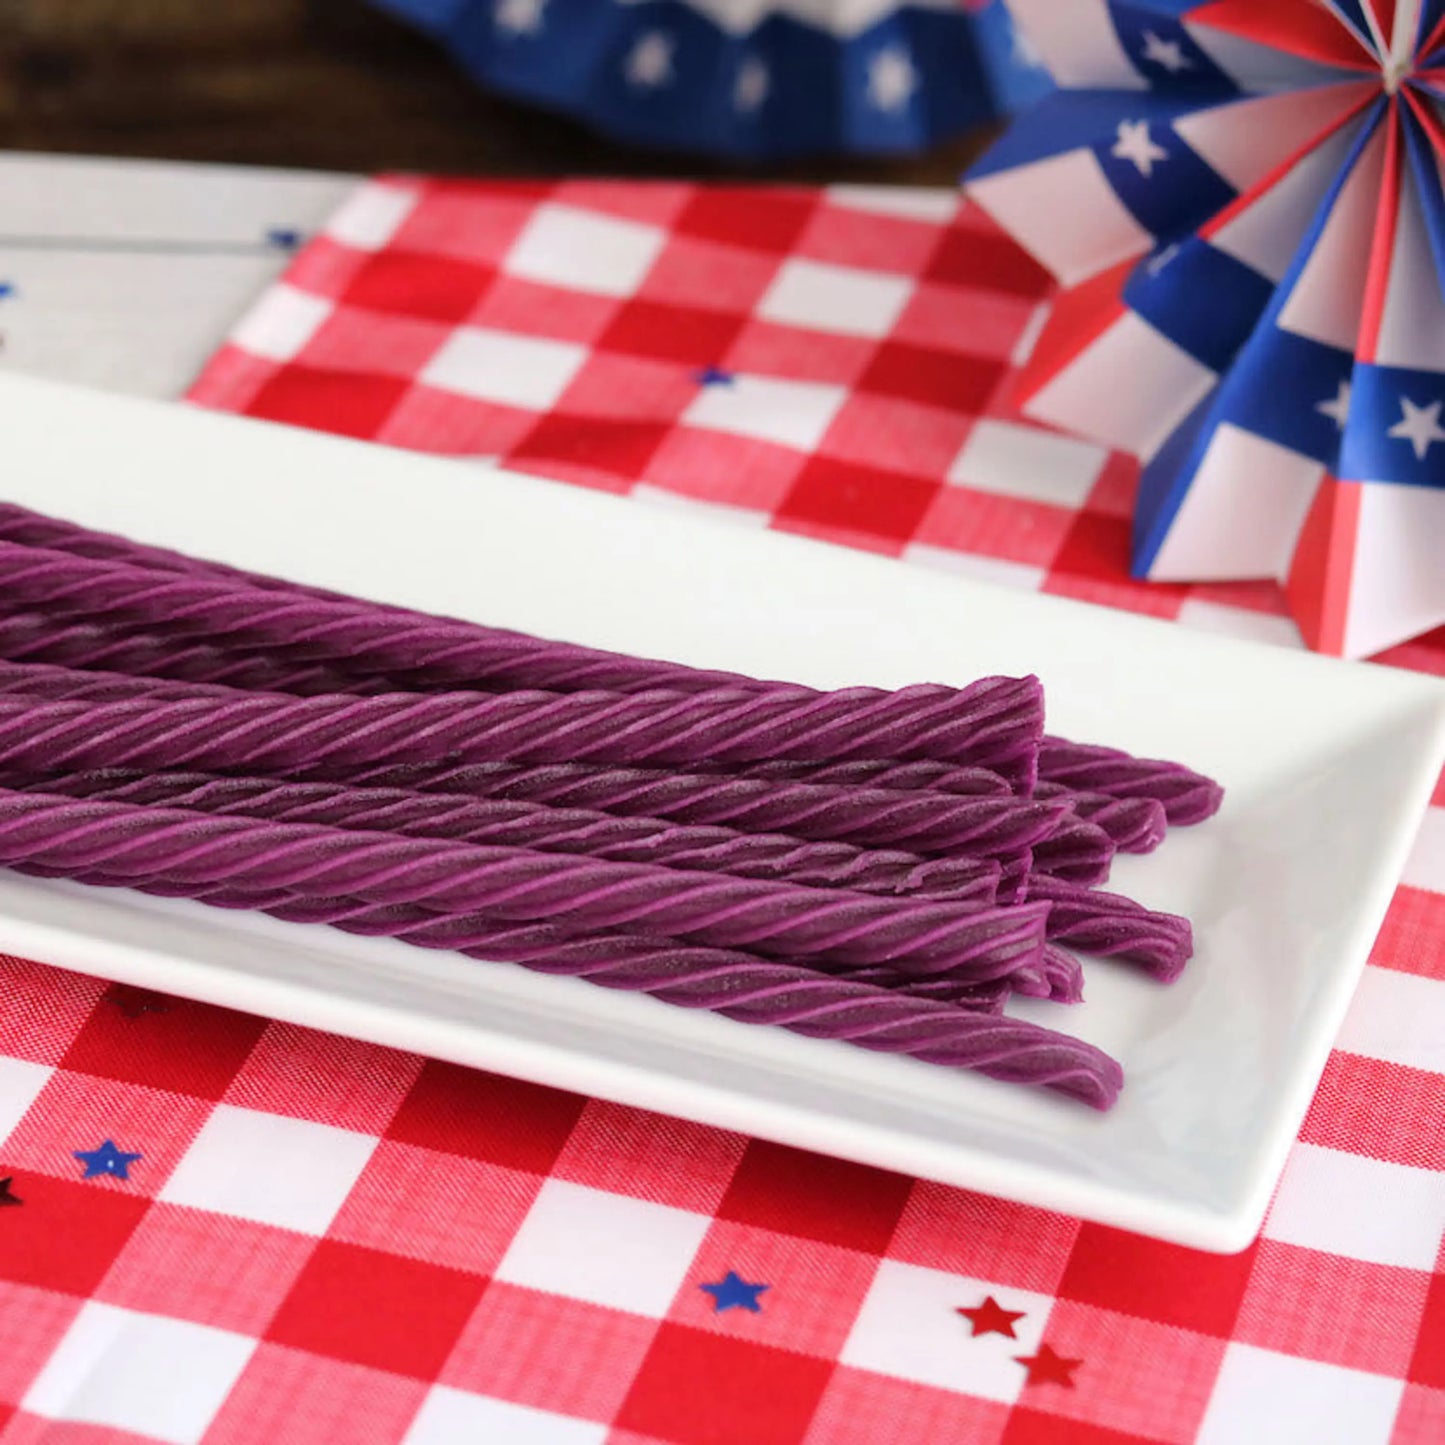 Red Vines Grape Licorice Twists on a picnic table with patriotic decorations